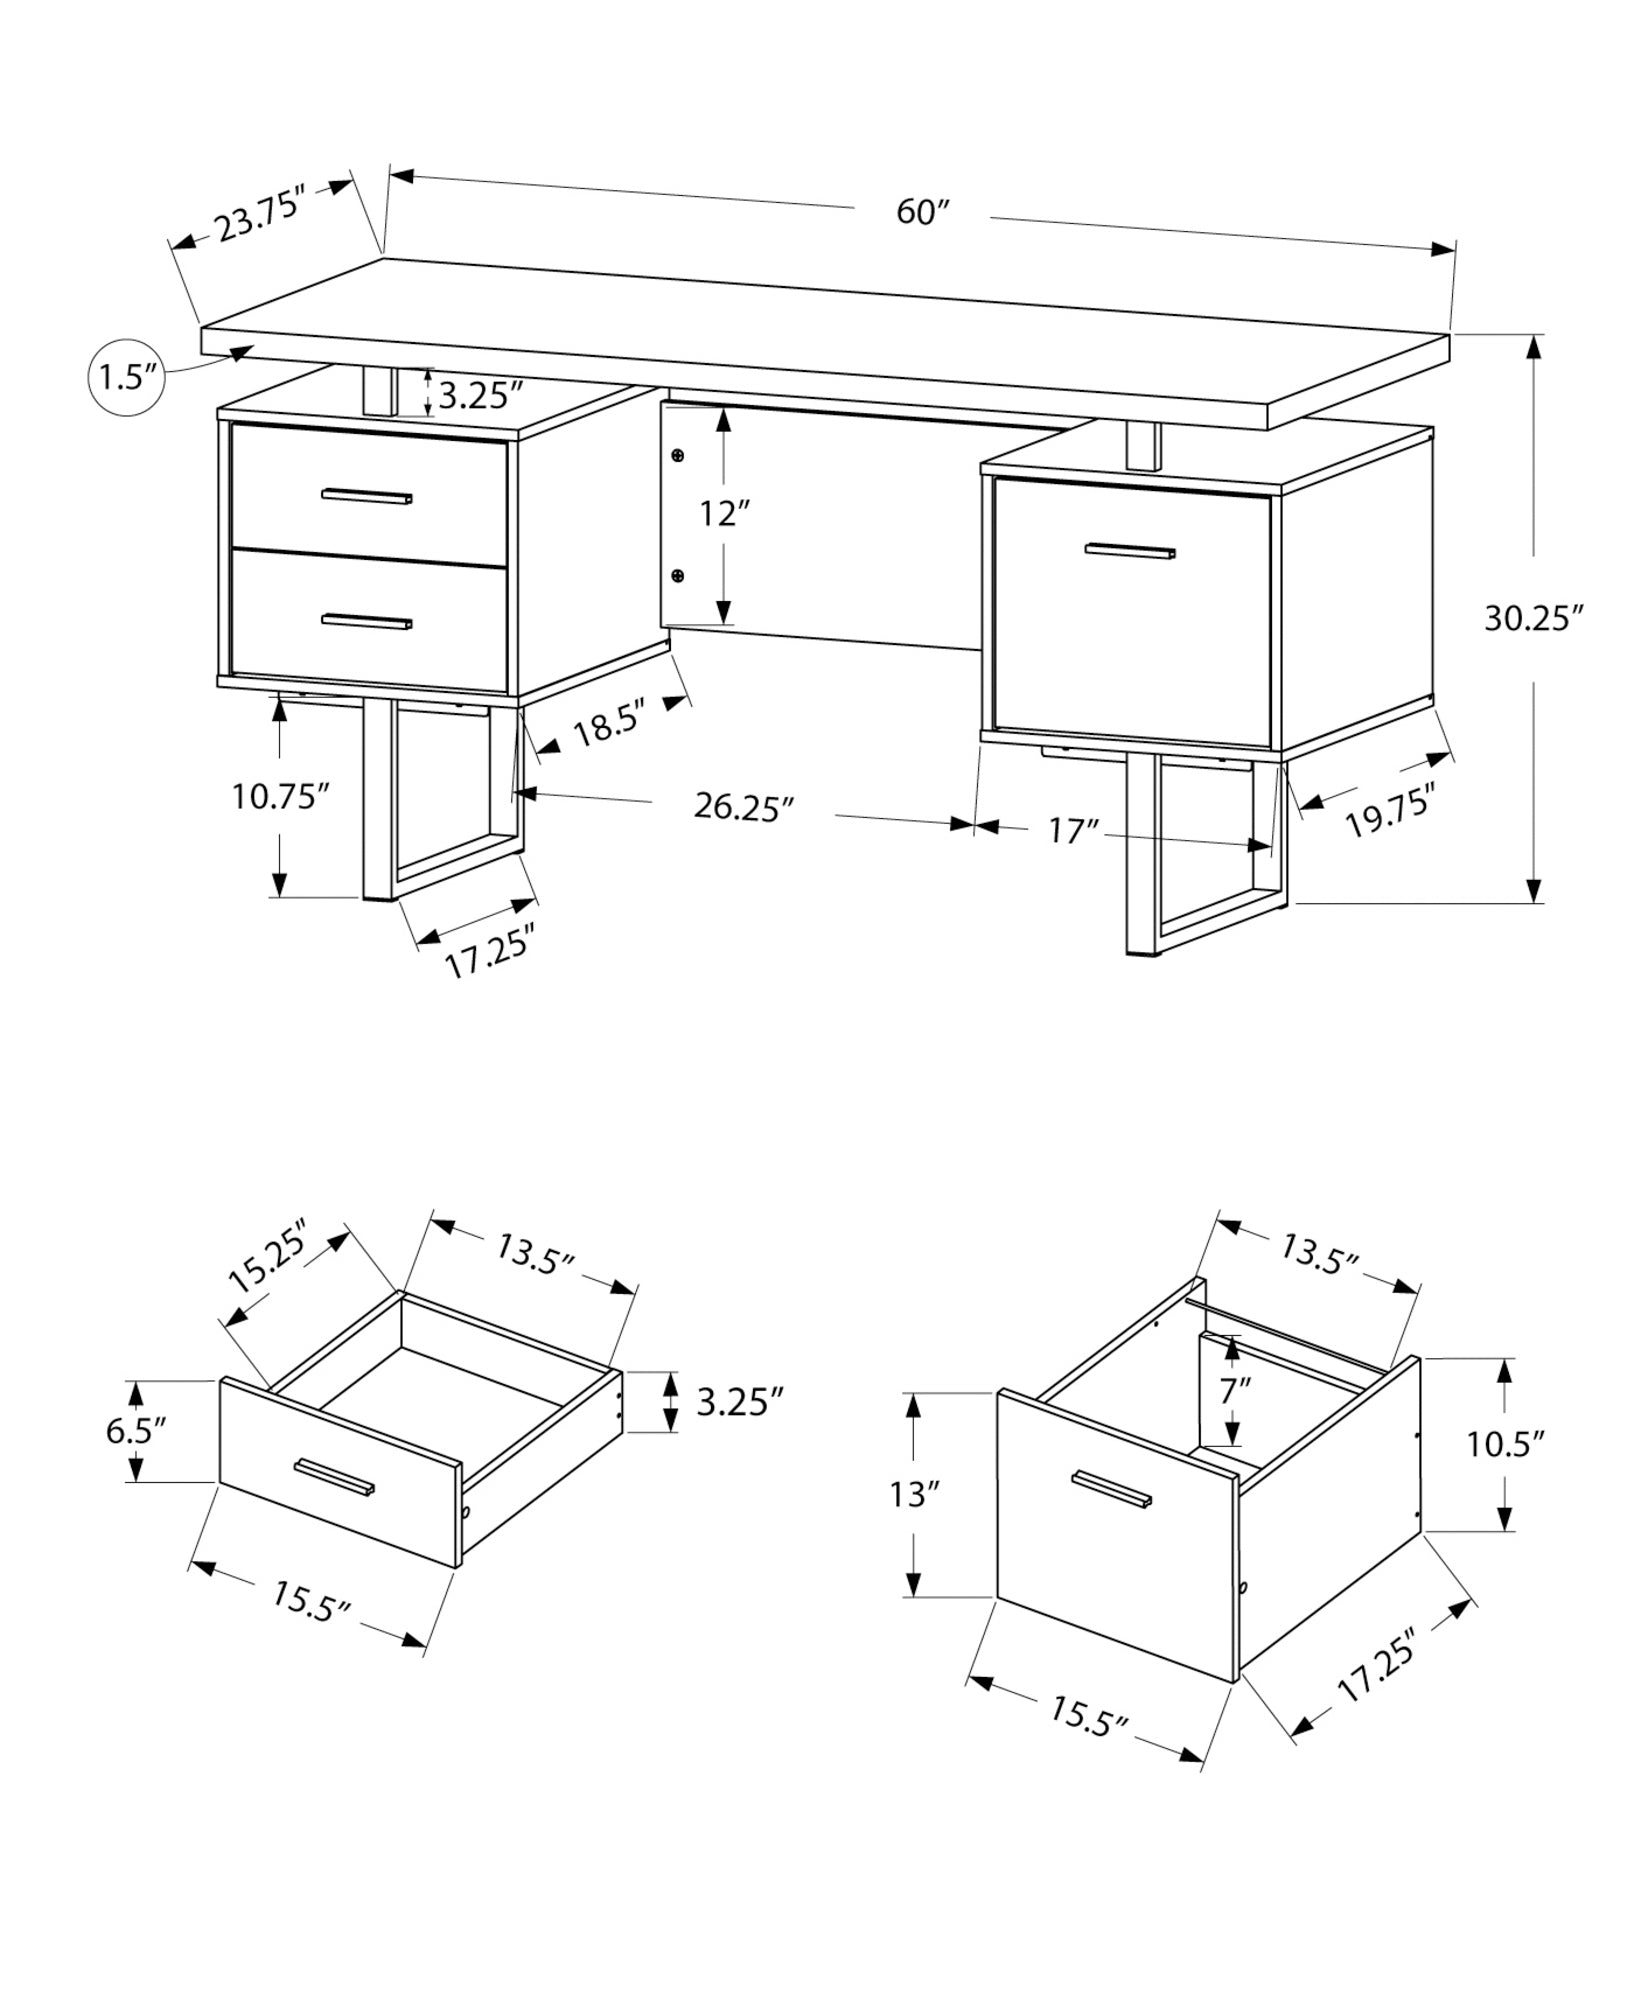 MN-397628    Computer Desk, Home Office, Laptop, Left, Right Set-Up, Storage Drawers, 60"L, Metal, Laminate, Natural, Black, Contemporary, Modern